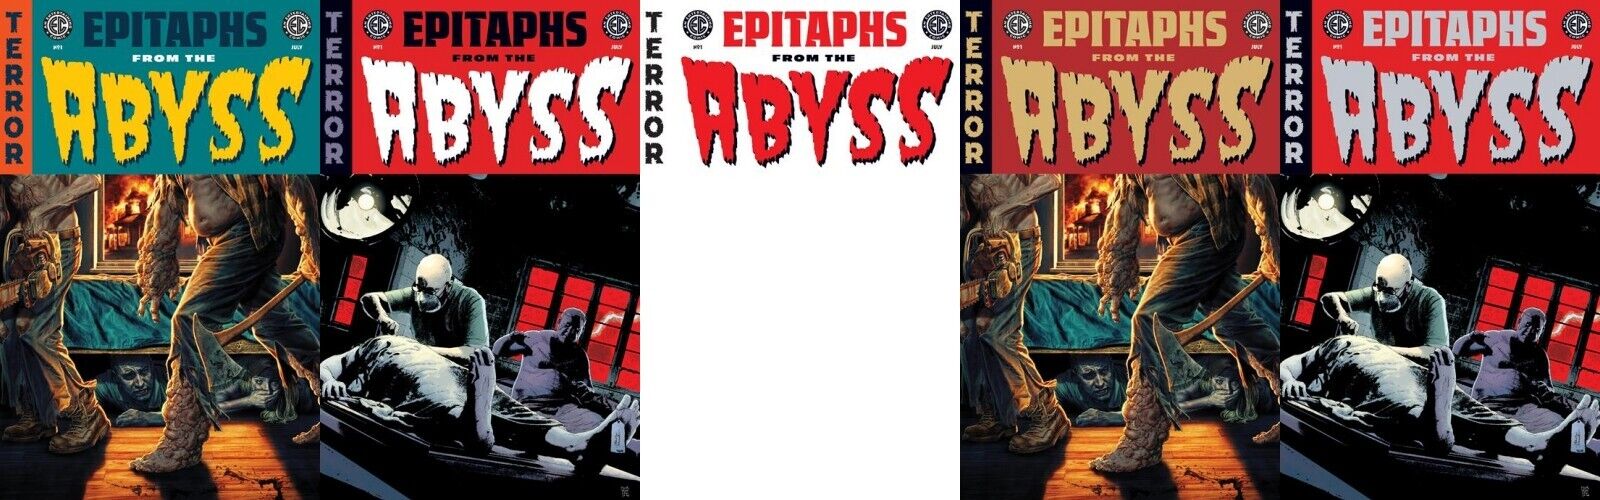 EC Epitaphs From The Abyss #1 A,B,C,D,E SET ALL 5 CVRS WITH FOILS PRESALE 7/24